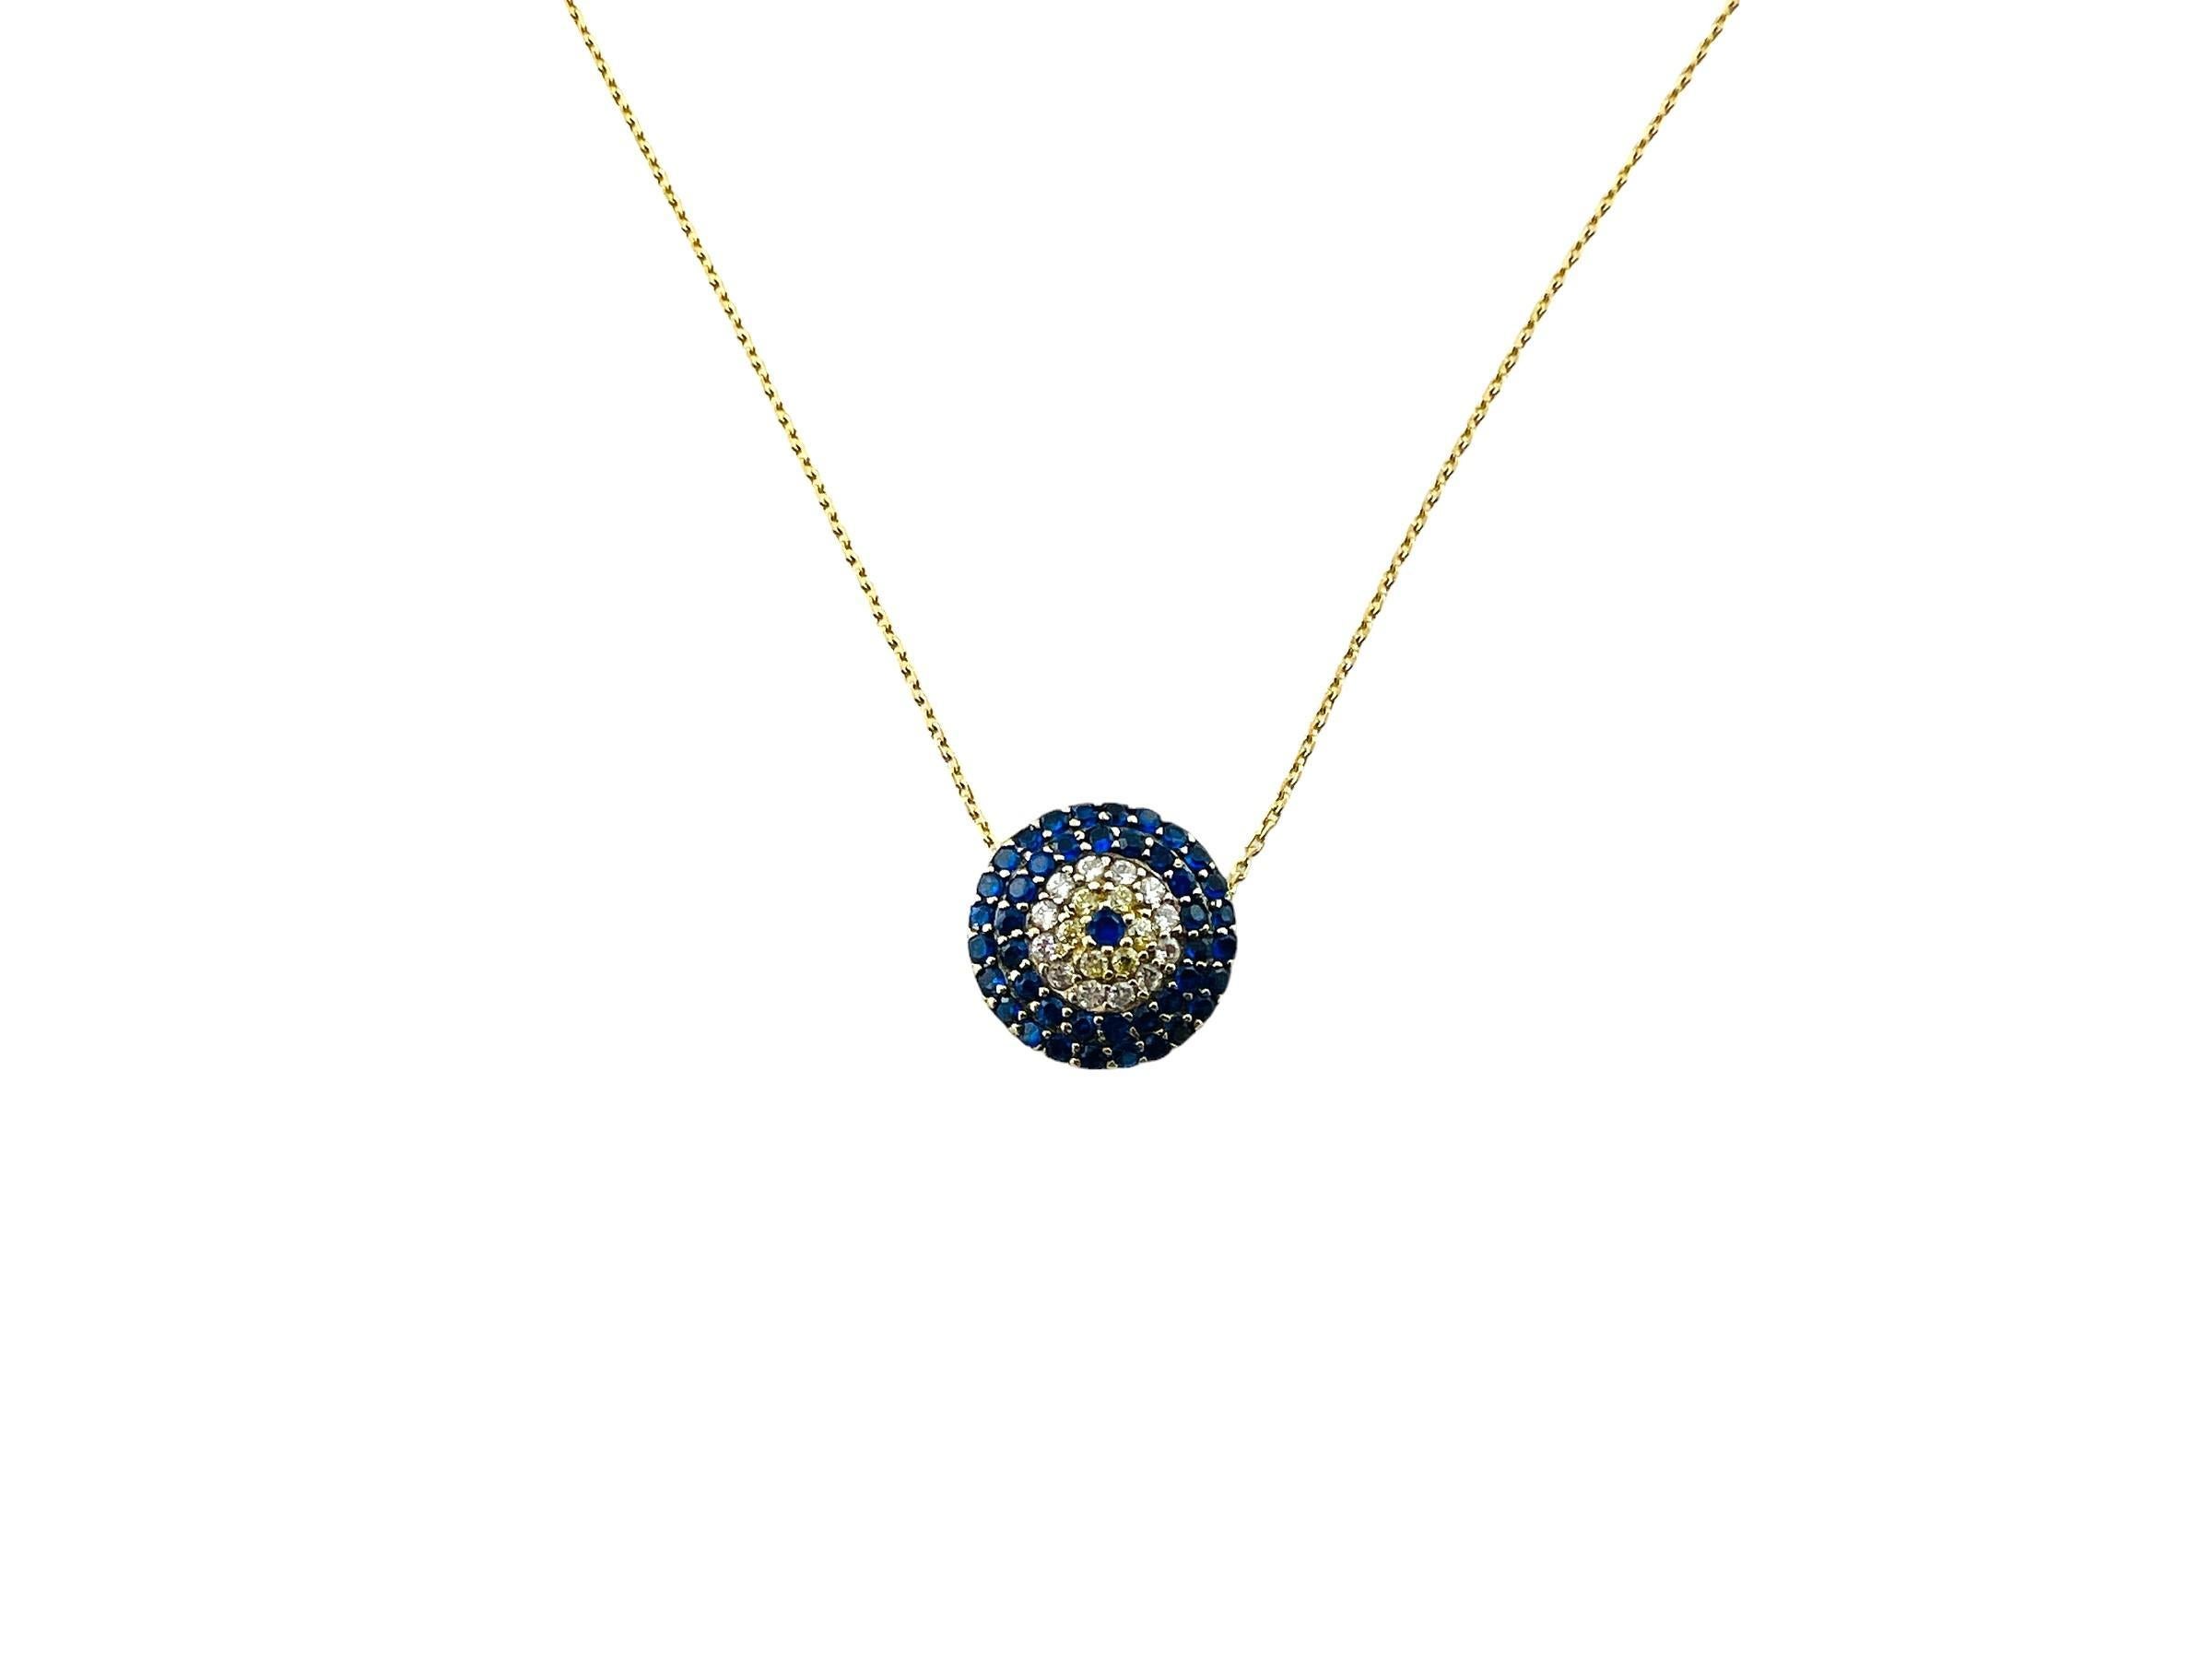 14K Yellow Gold Faceted Blue White Yellow Glass Stone Pendant Necklace #15627 In Good Condition For Sale In Washington Depot, CT